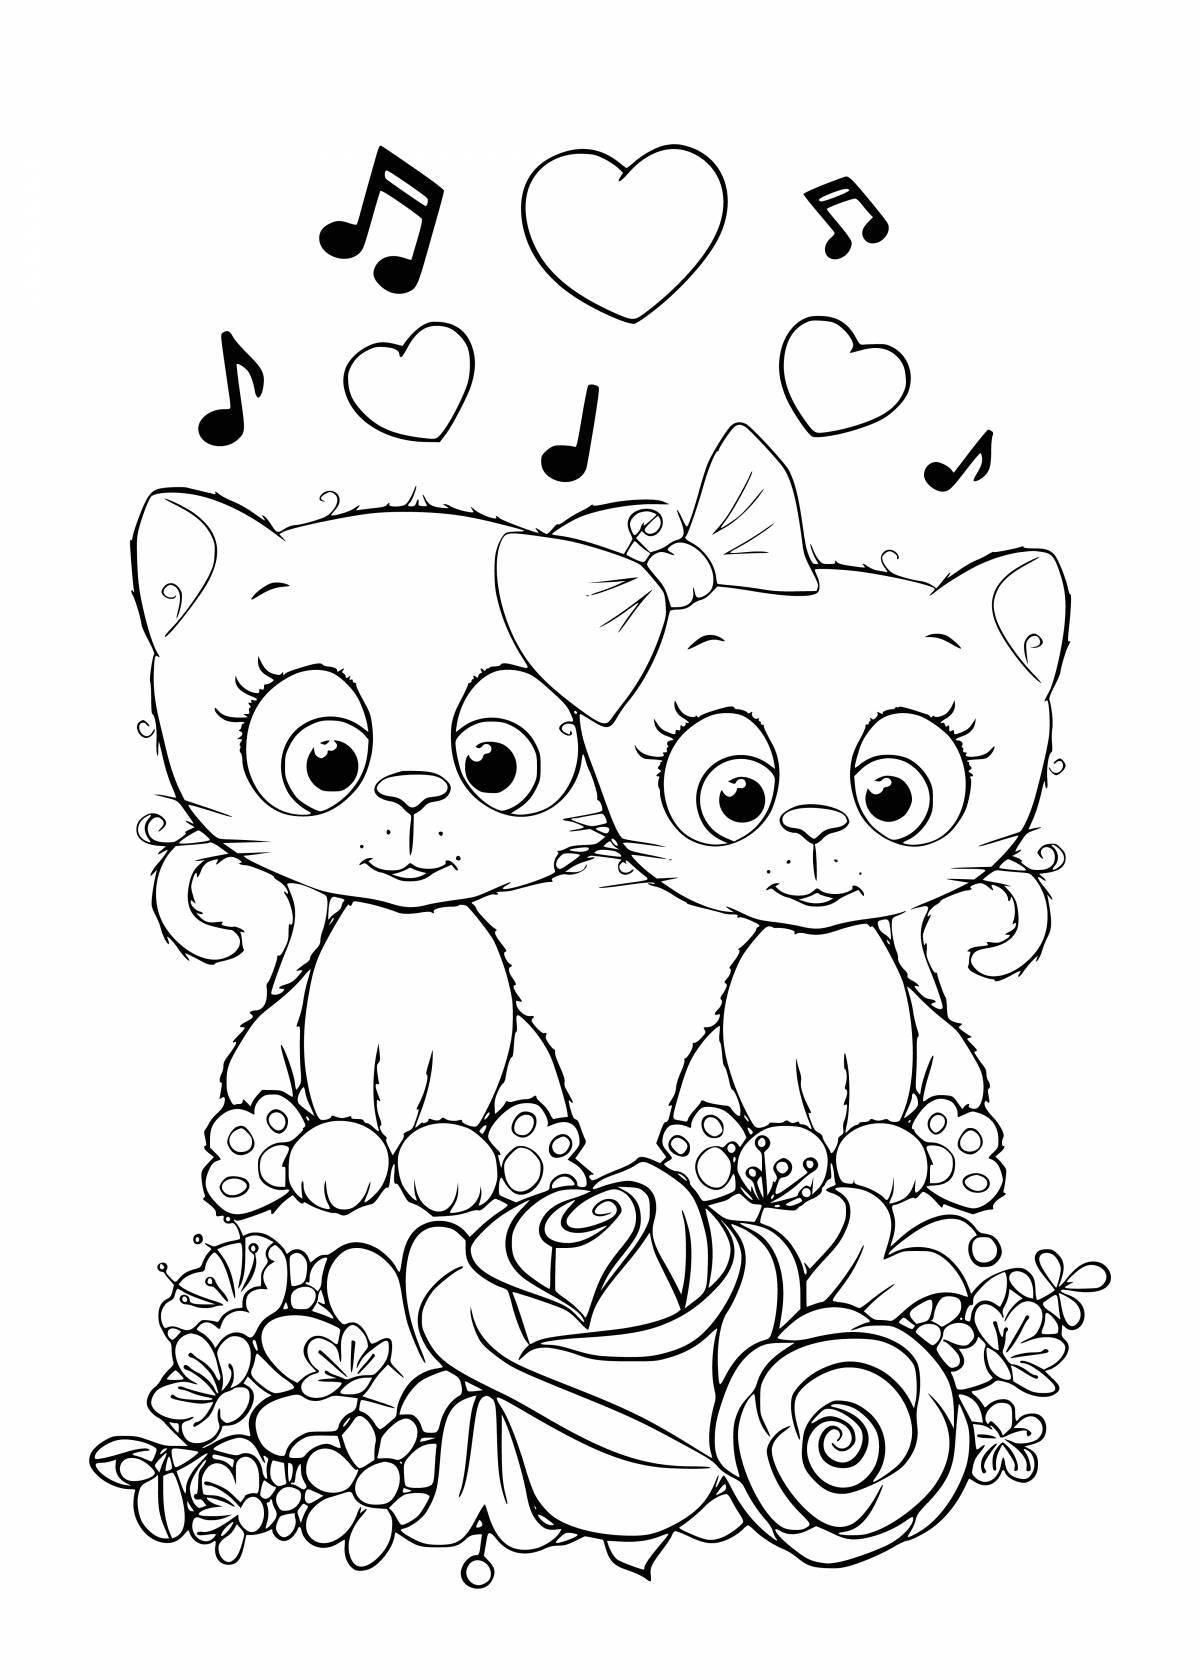 Soft cat coloring for girls